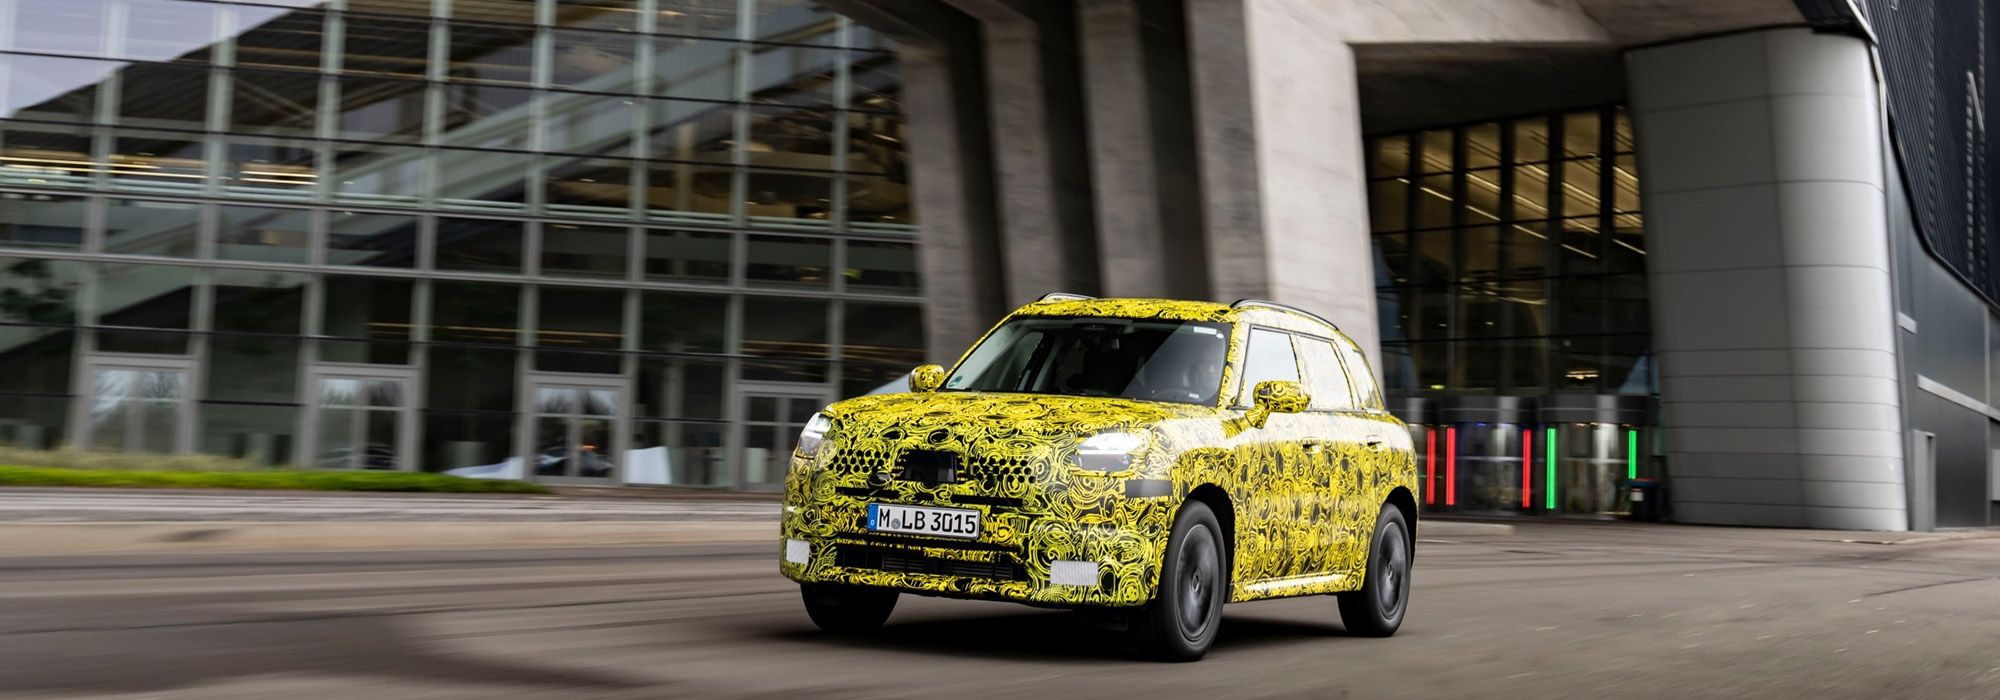 The first MINI "Made in Germany": BMW Group Plant Leipzig prepares production of the all-electric MINI Countryman.